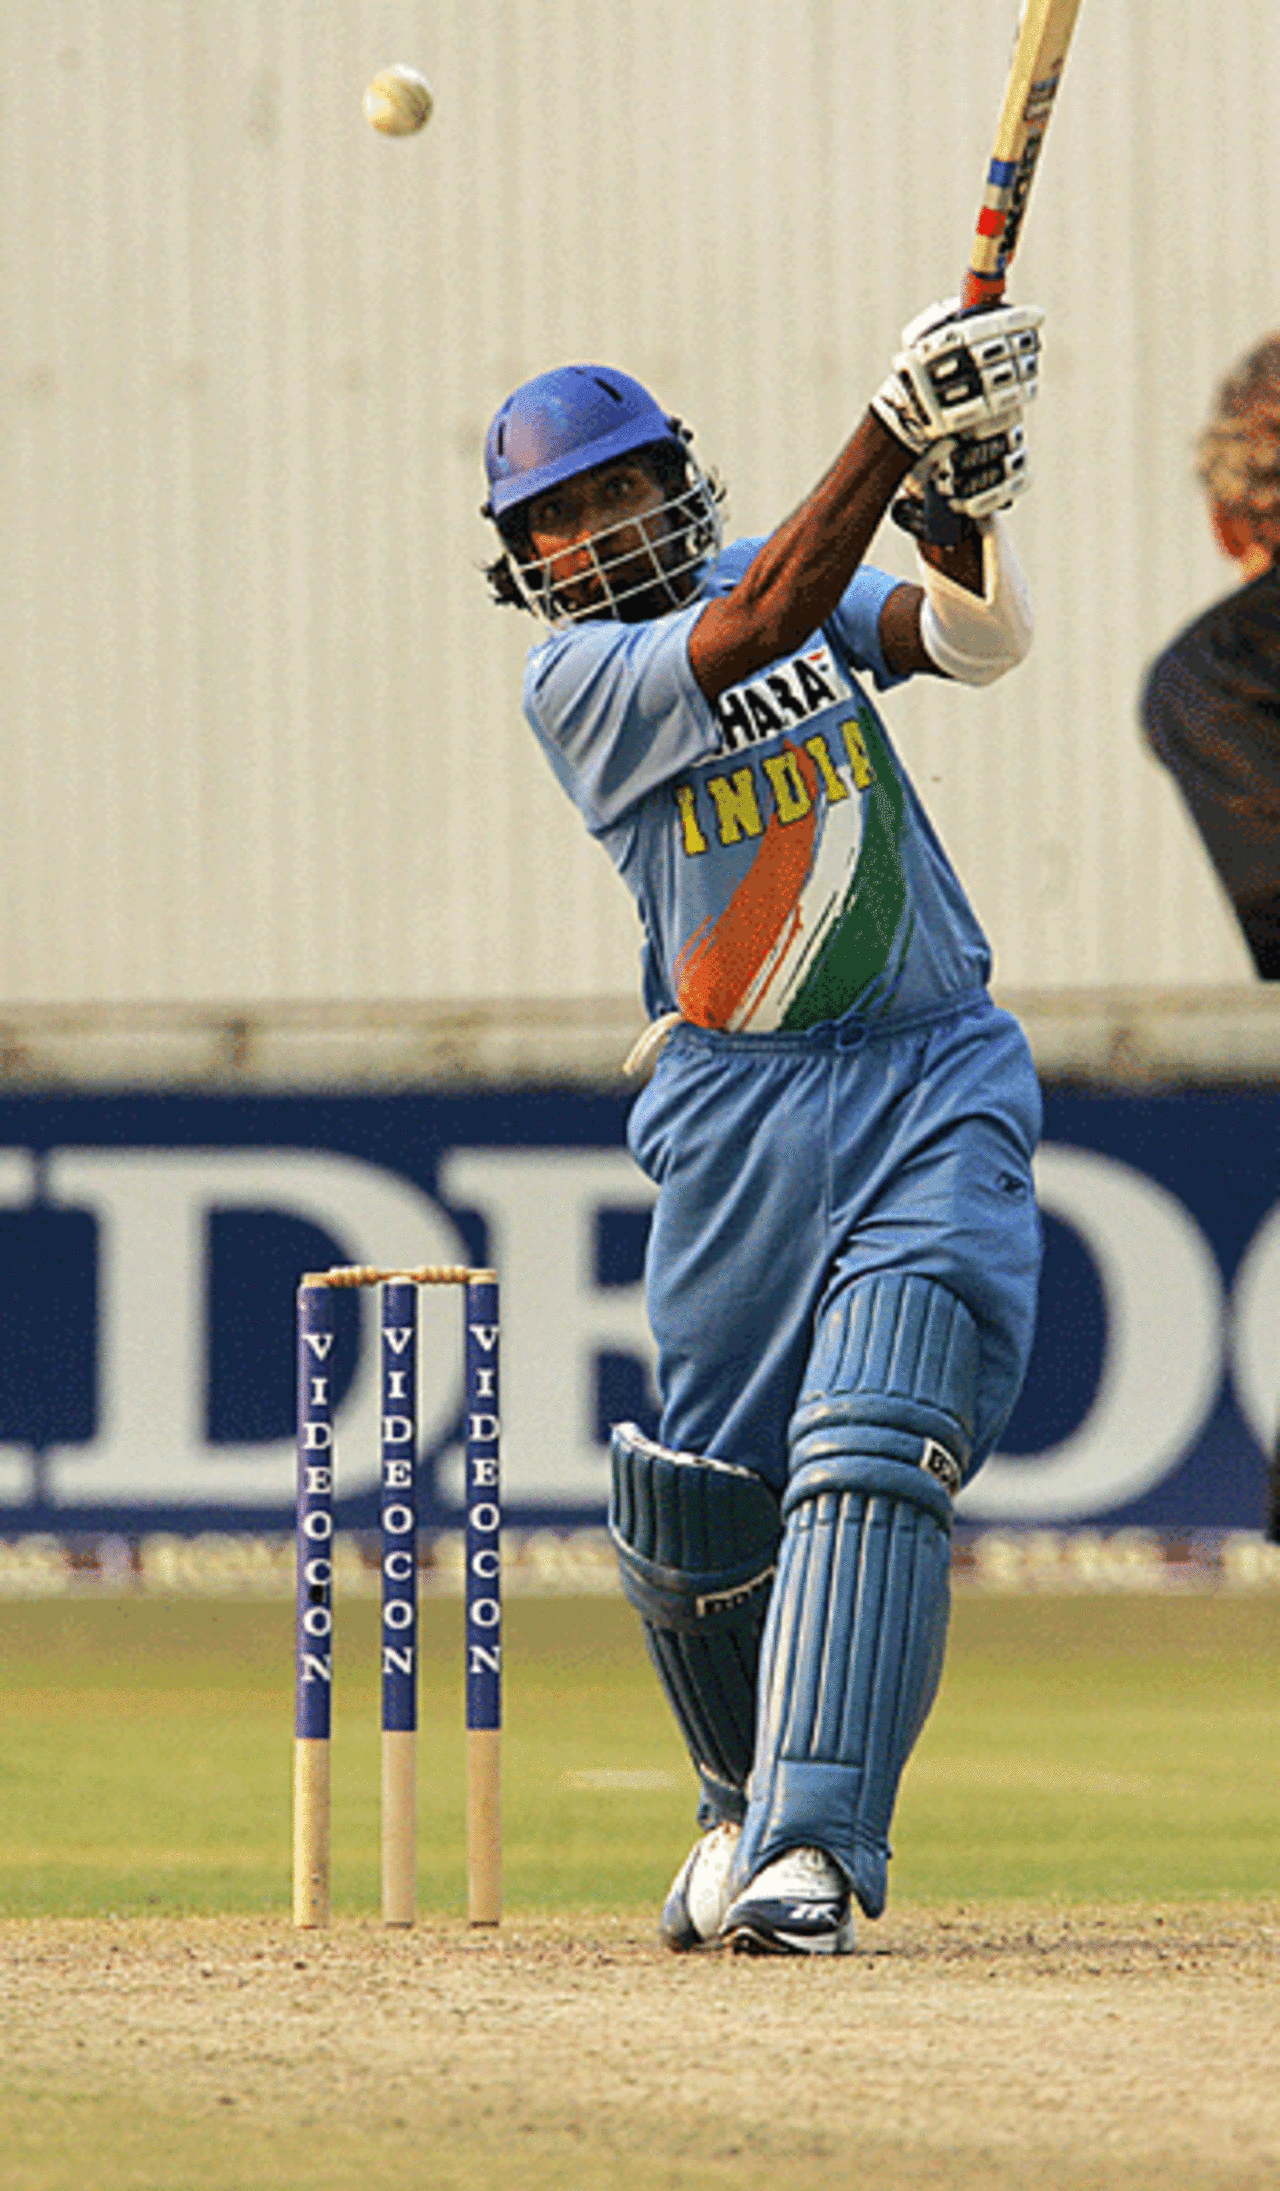 Jai P Yadav launches one over mid-off during a valiant 69, India v New Zealand, Bulawayo, August 26, 2005